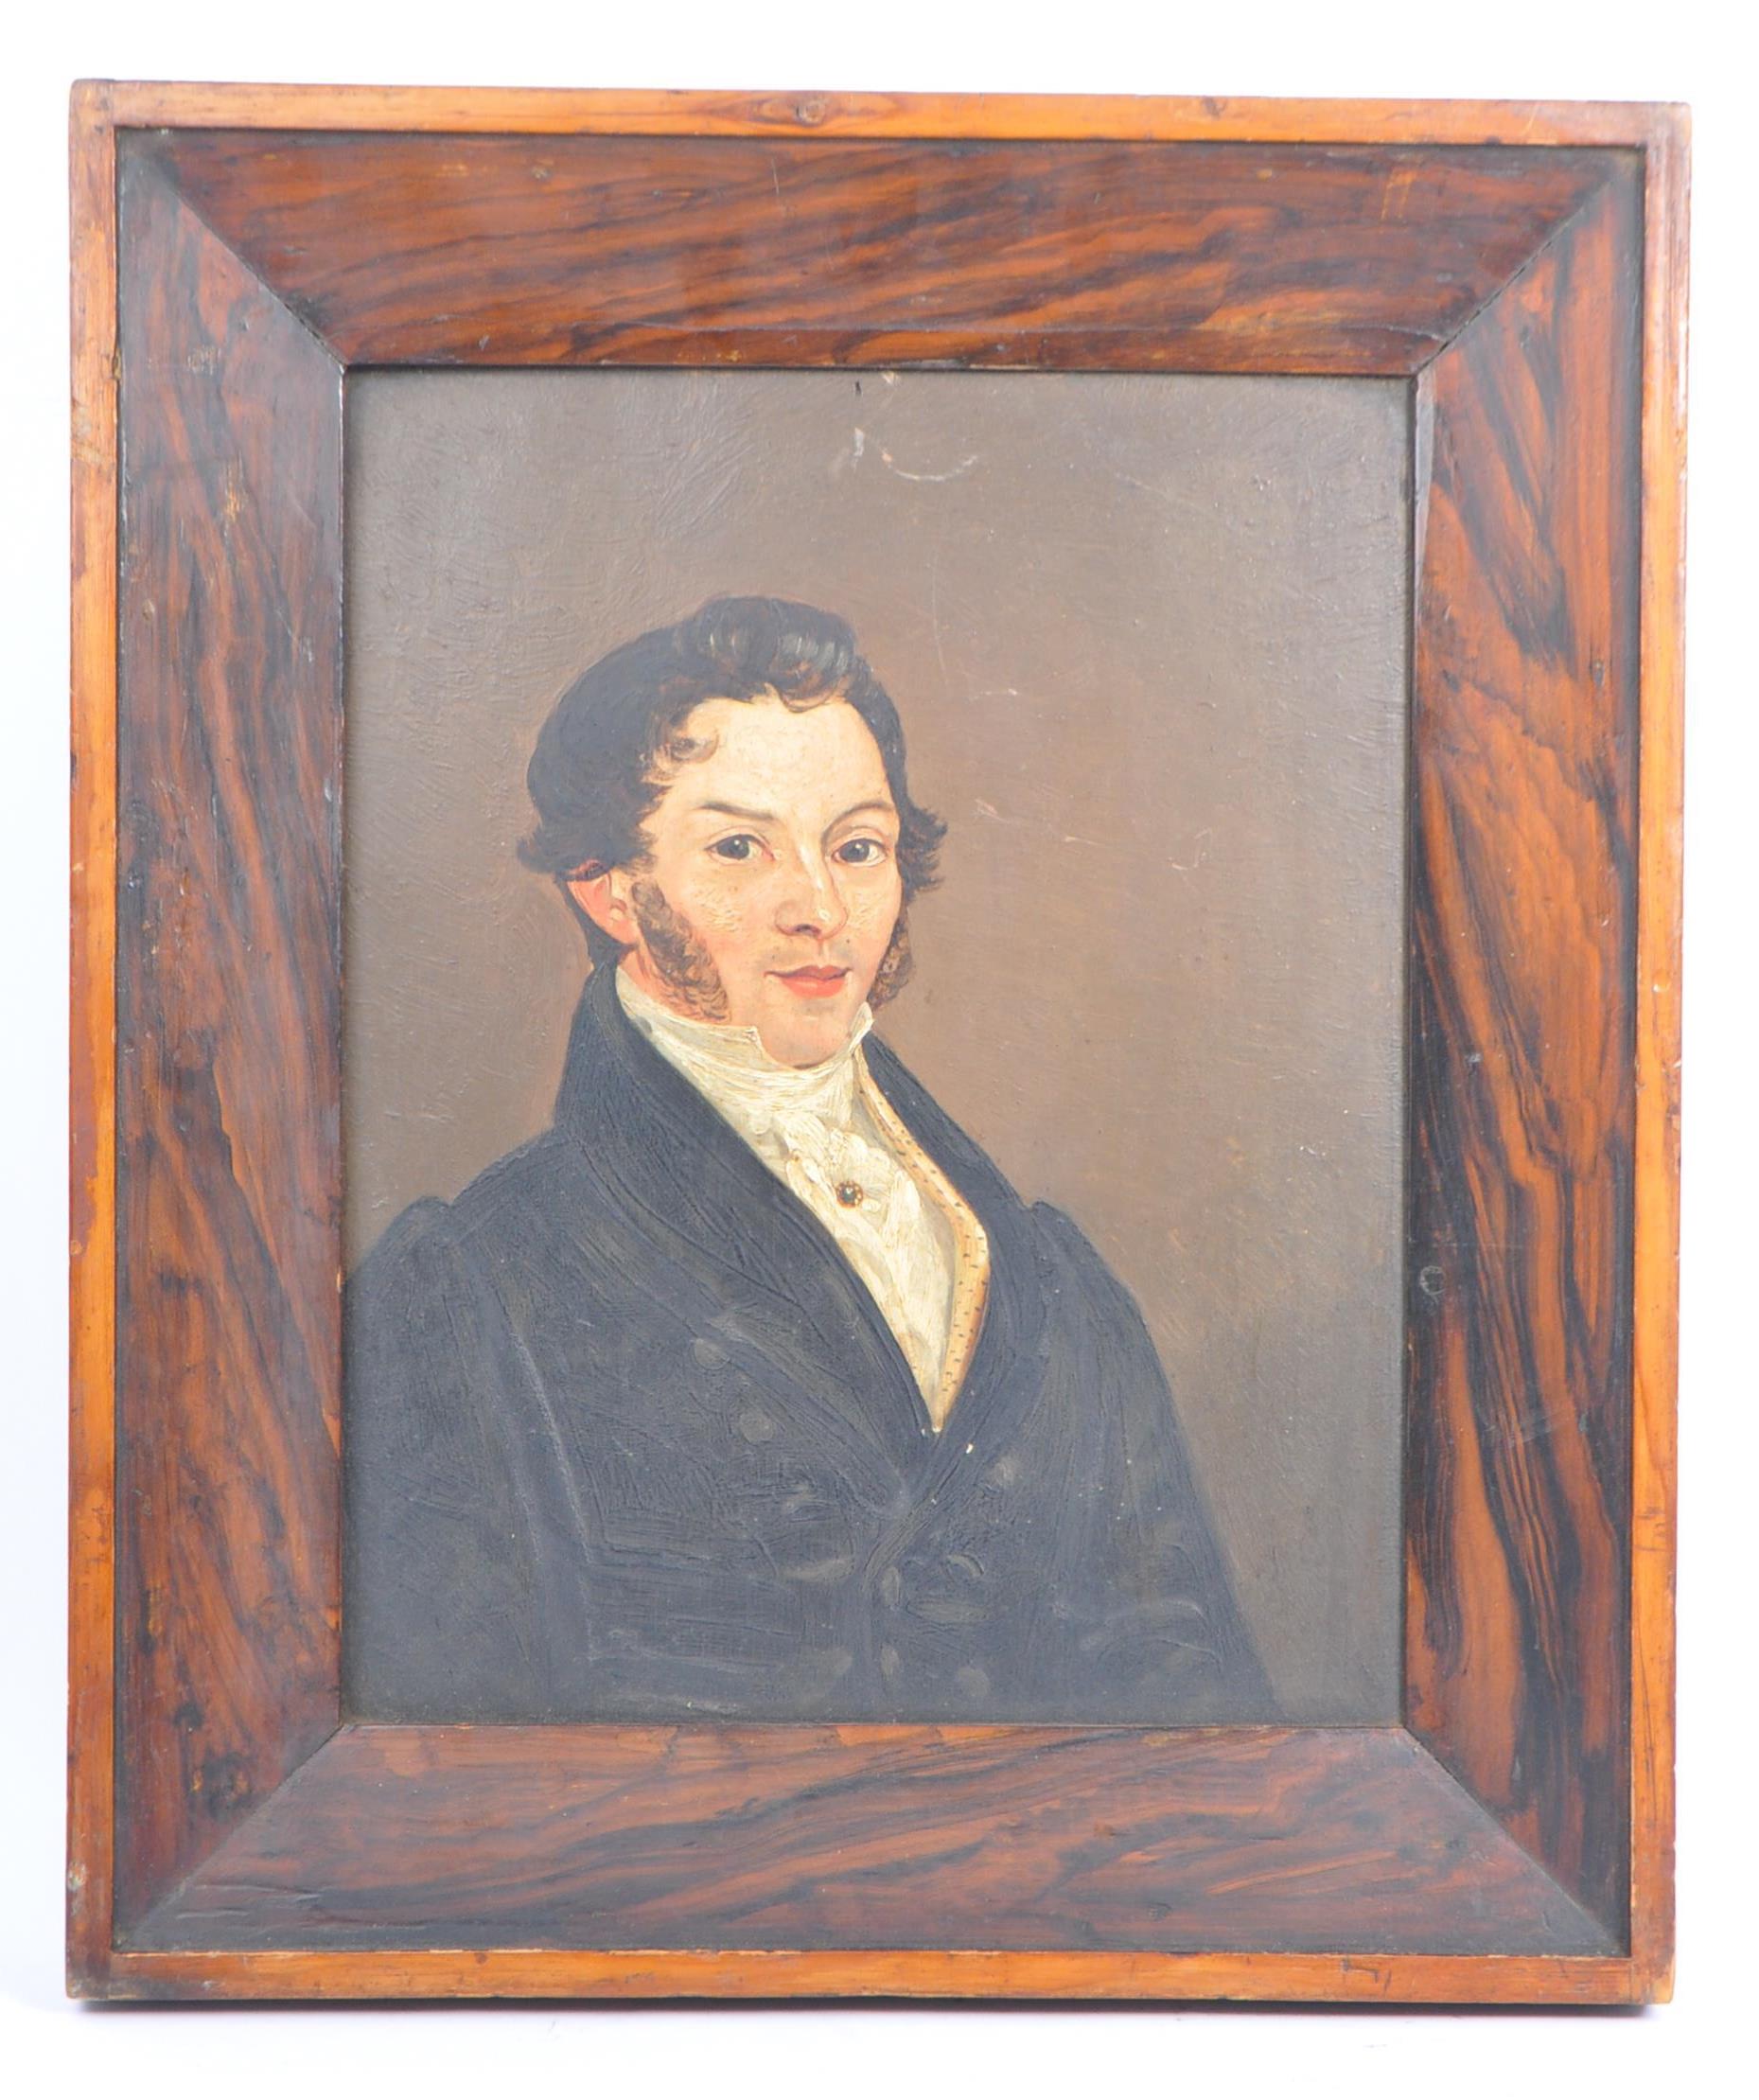 TWO 19TH CENTURY OIL PORTRAIT STUDIES PAINTINGS - Image 4 of 6